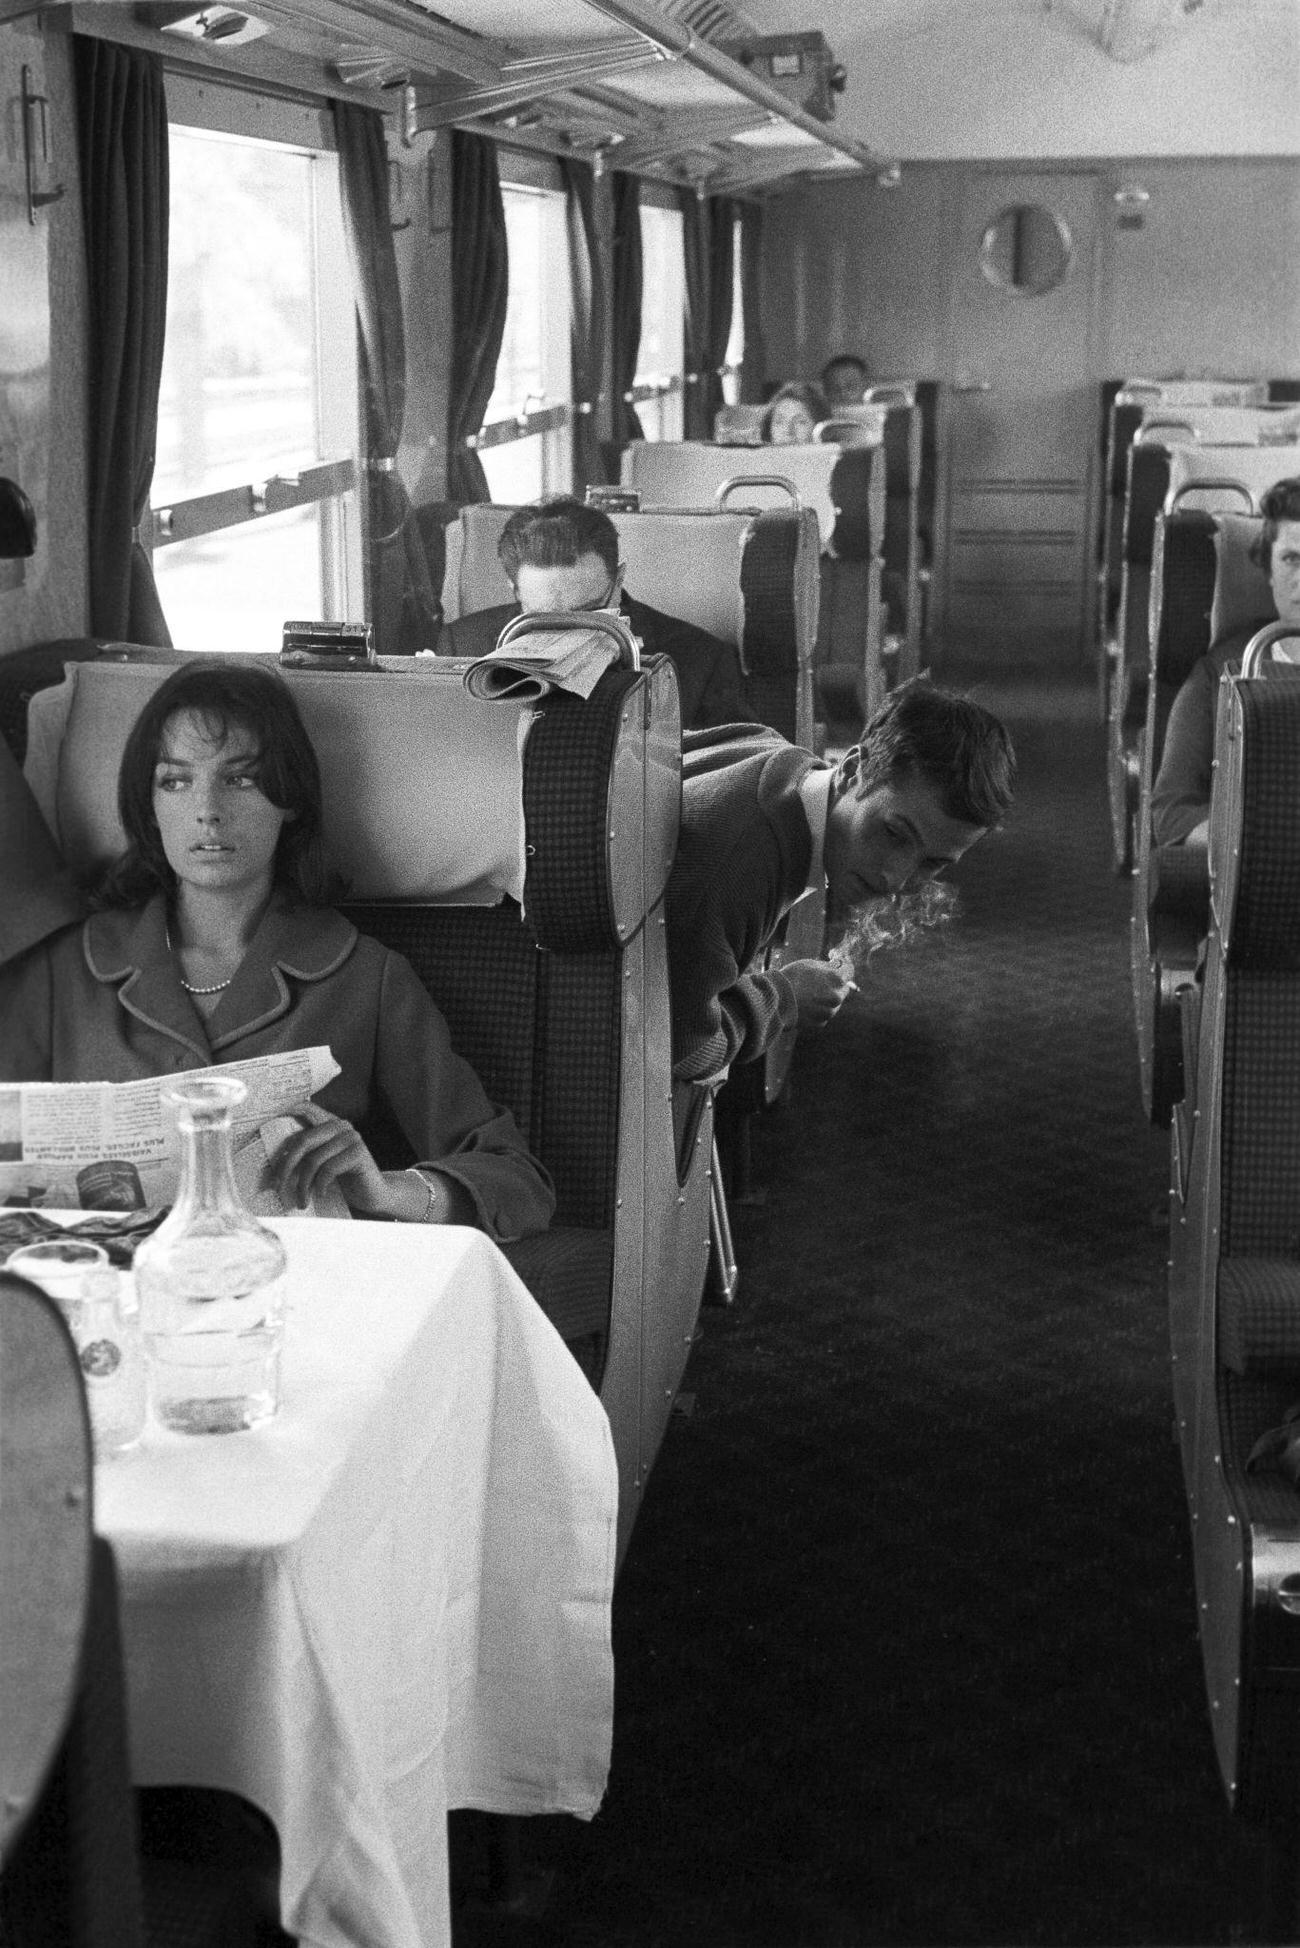 The actress Marie Laforet traveling by first class car on the Paris-Lille train, reading the newspaper on June 3, 1959.